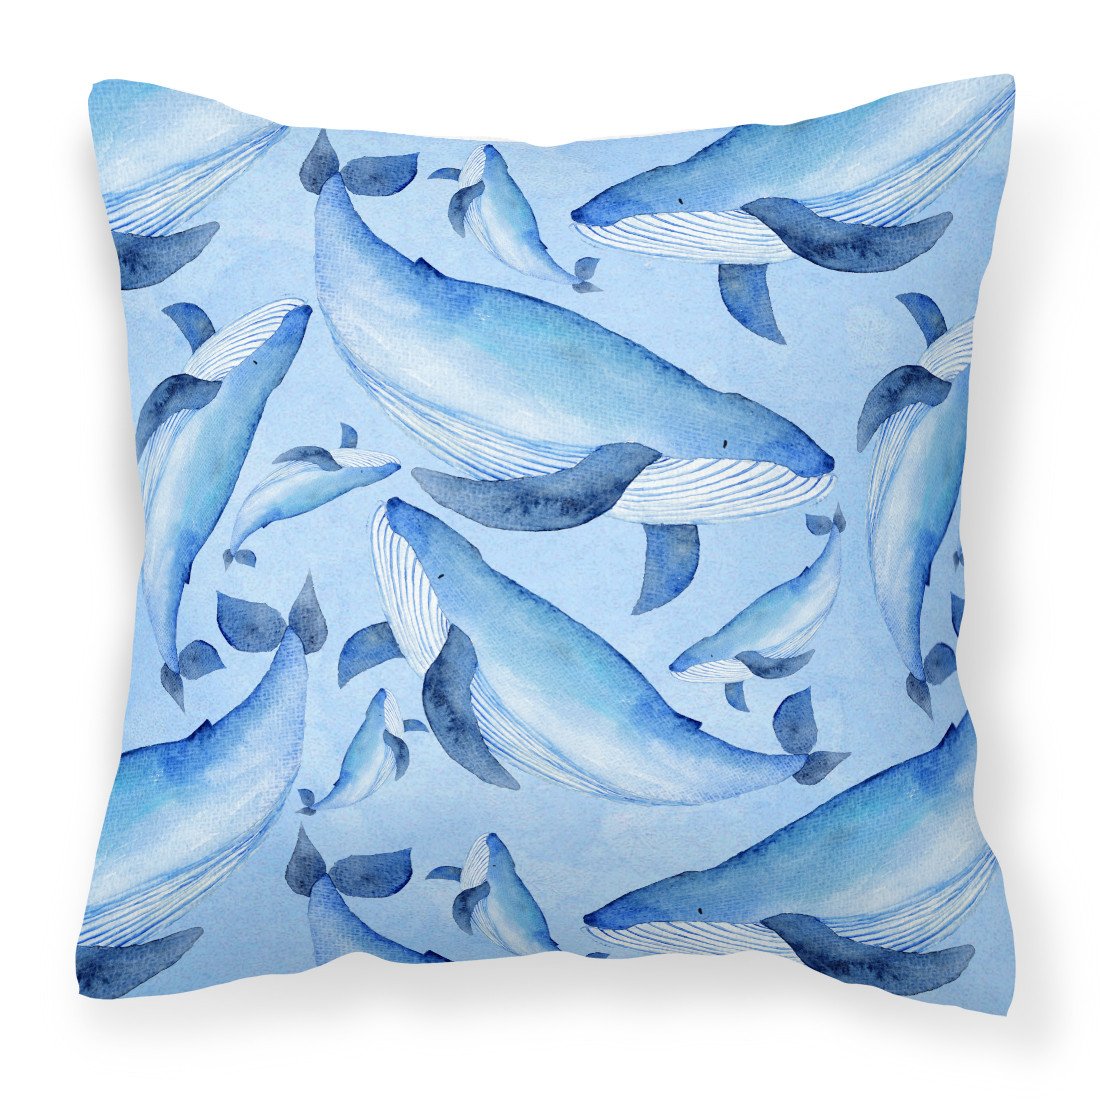 Watercolor Nautical Whales Fabric Decorative Pillow BB7575PW1818 by Caroline's Treasures